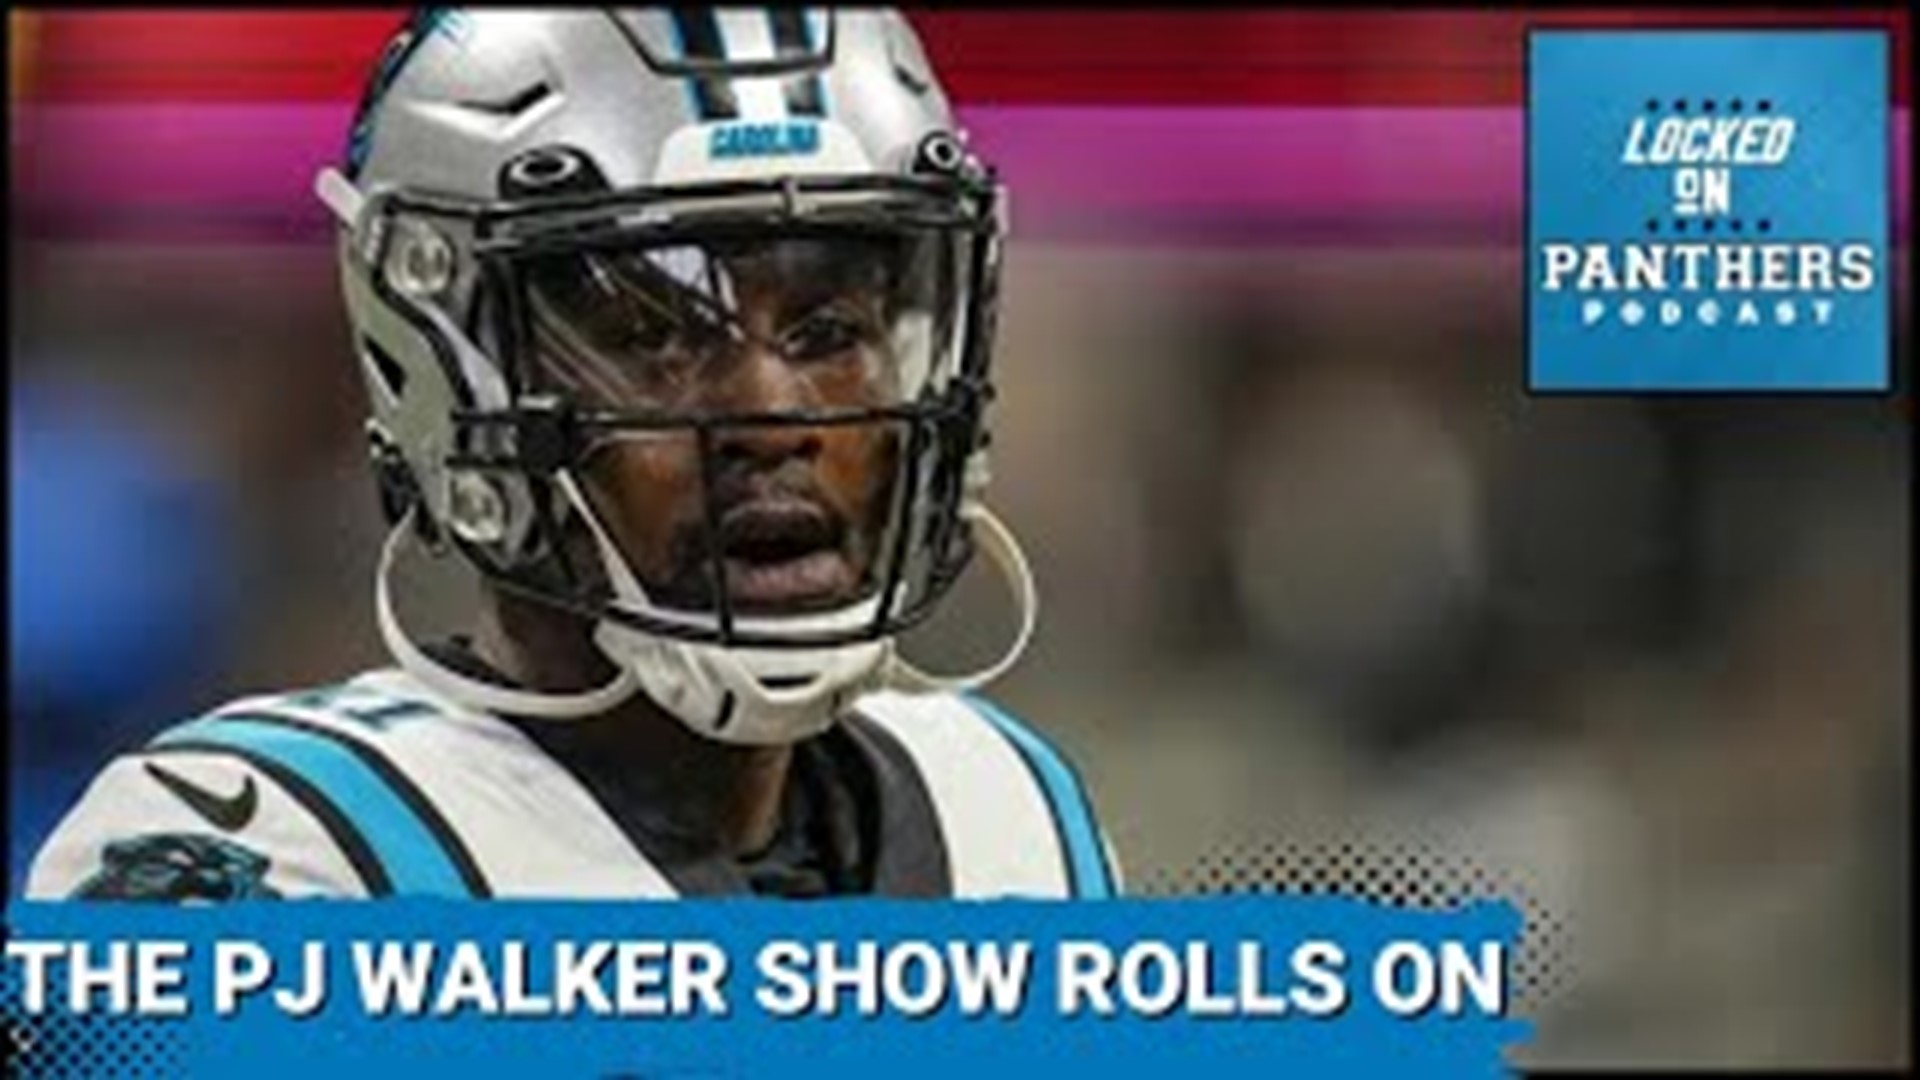 PJ Walker is set to start on Thursday Night Football against the Falcons. Wilks has not committed to a long term starting QB. That and more on Locked on Panthers.